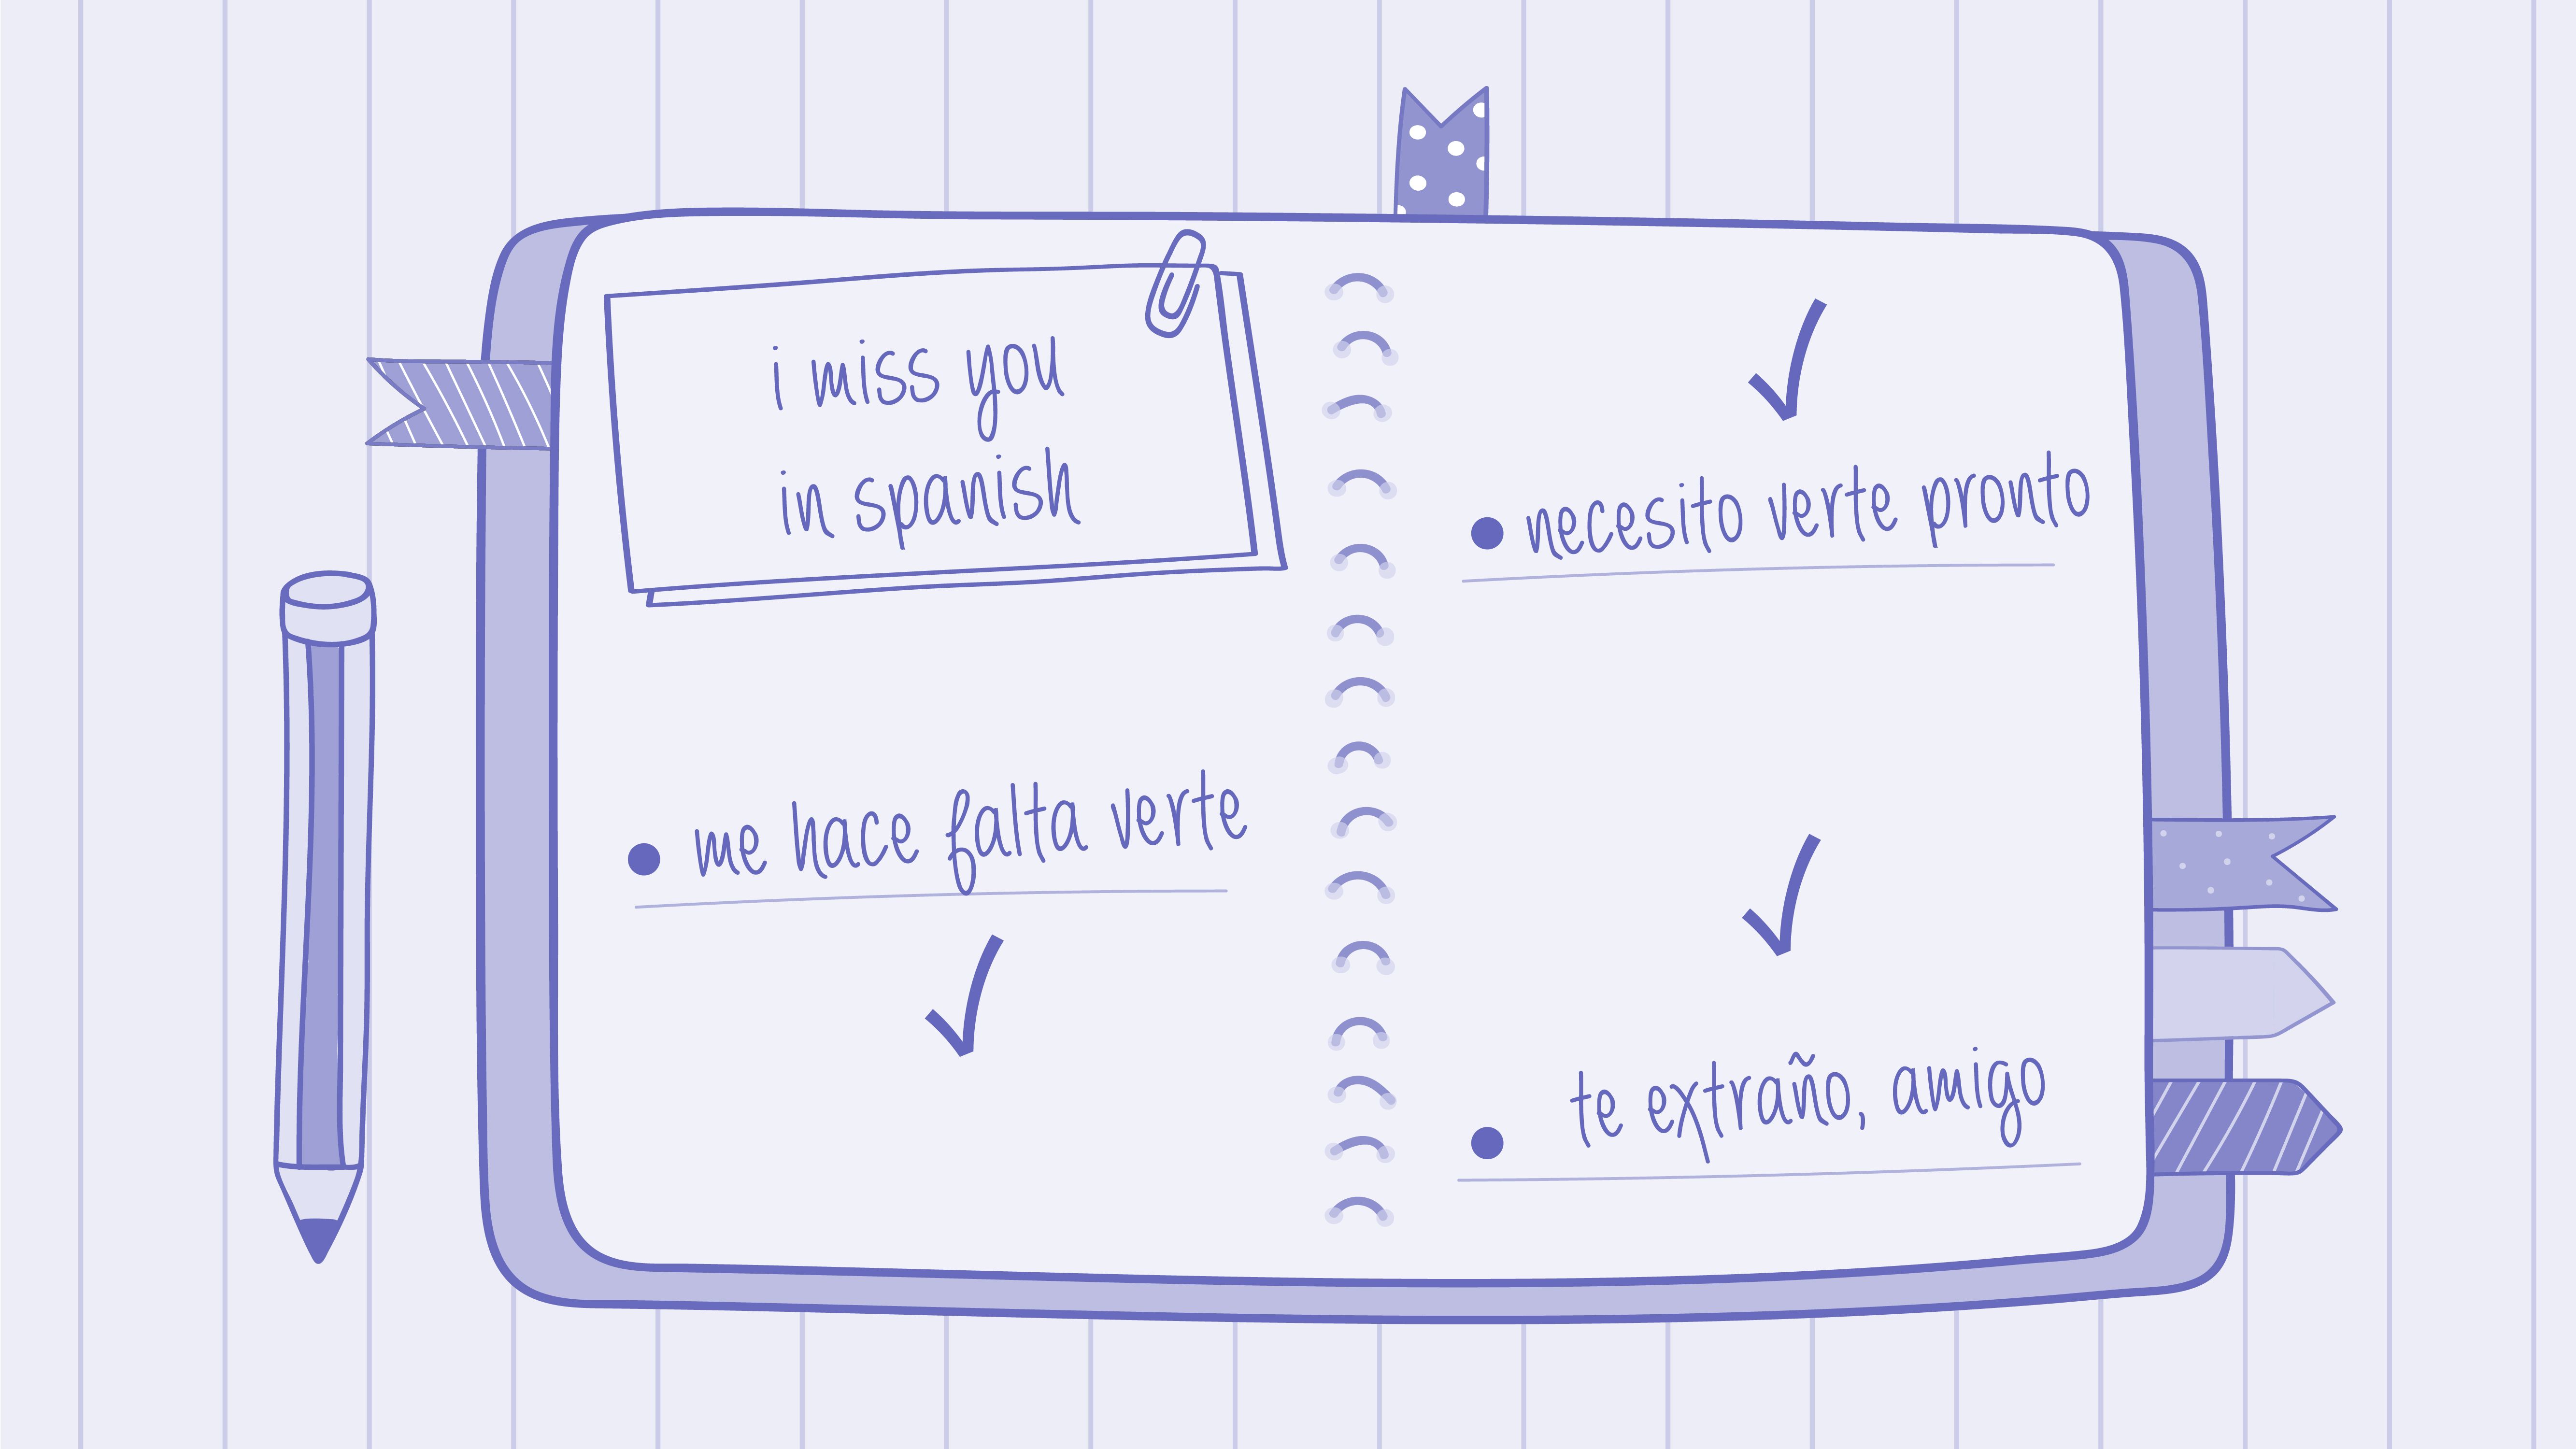 A notebook with different phrases noted down, such as “me hace falta verte”, “necesito verte pronto”, “te extraño, amigo”.